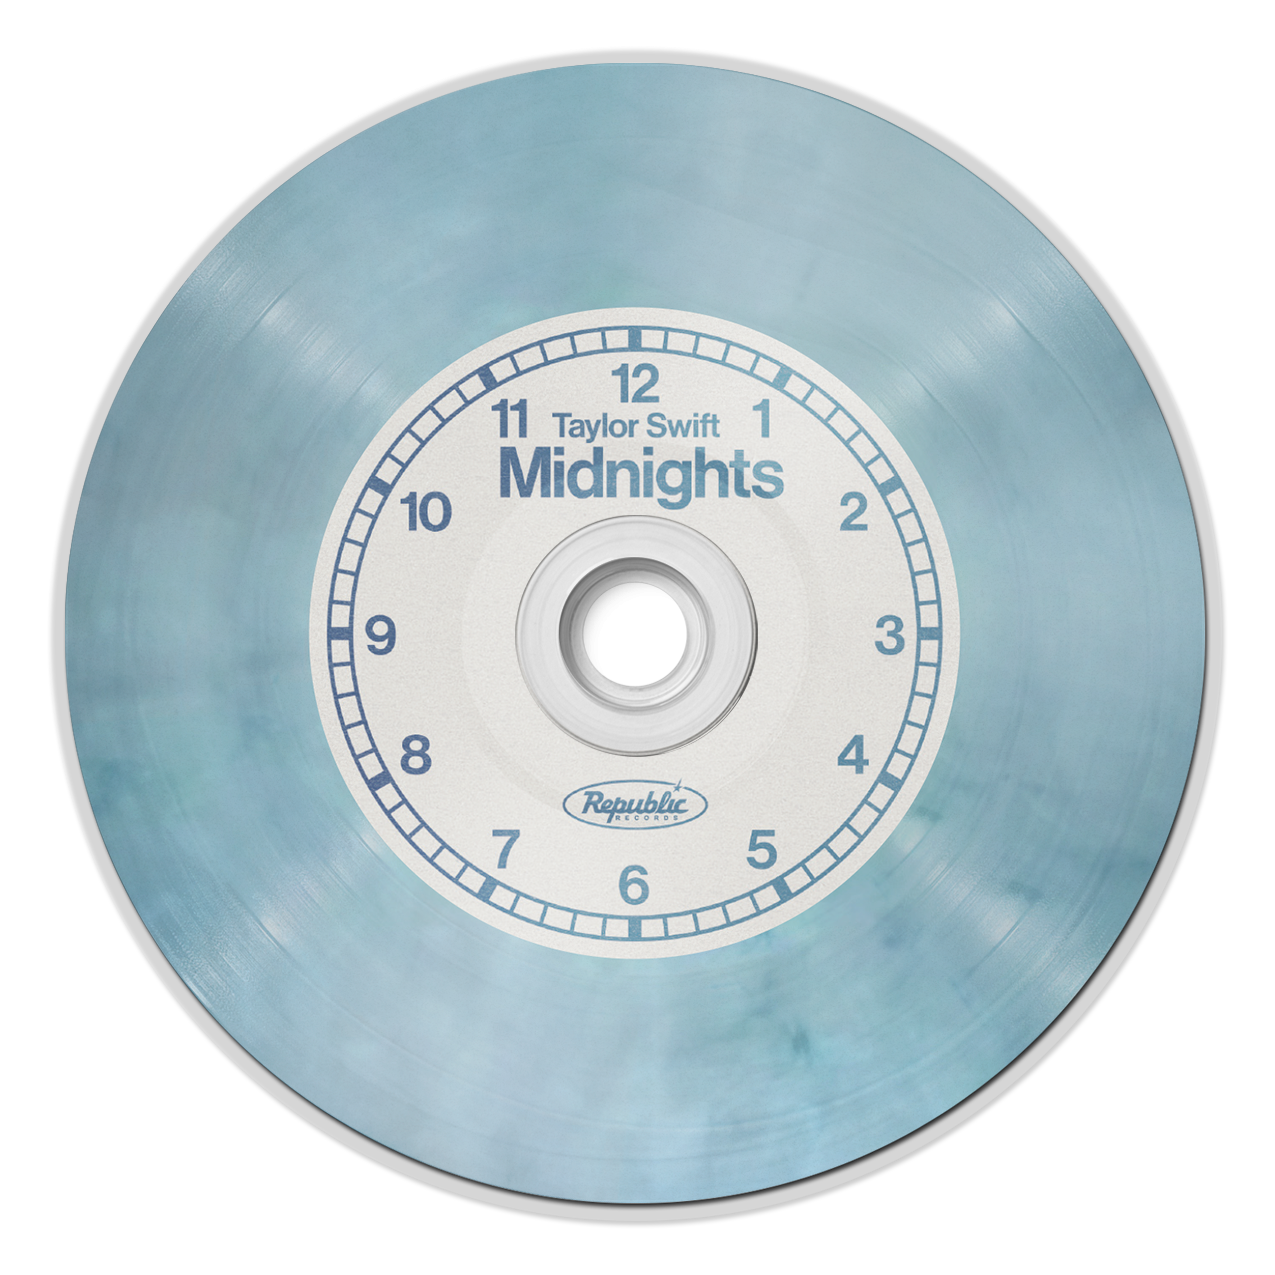 Midnights: Moonstone Blue Edition CD - Taylor Swift Official Store